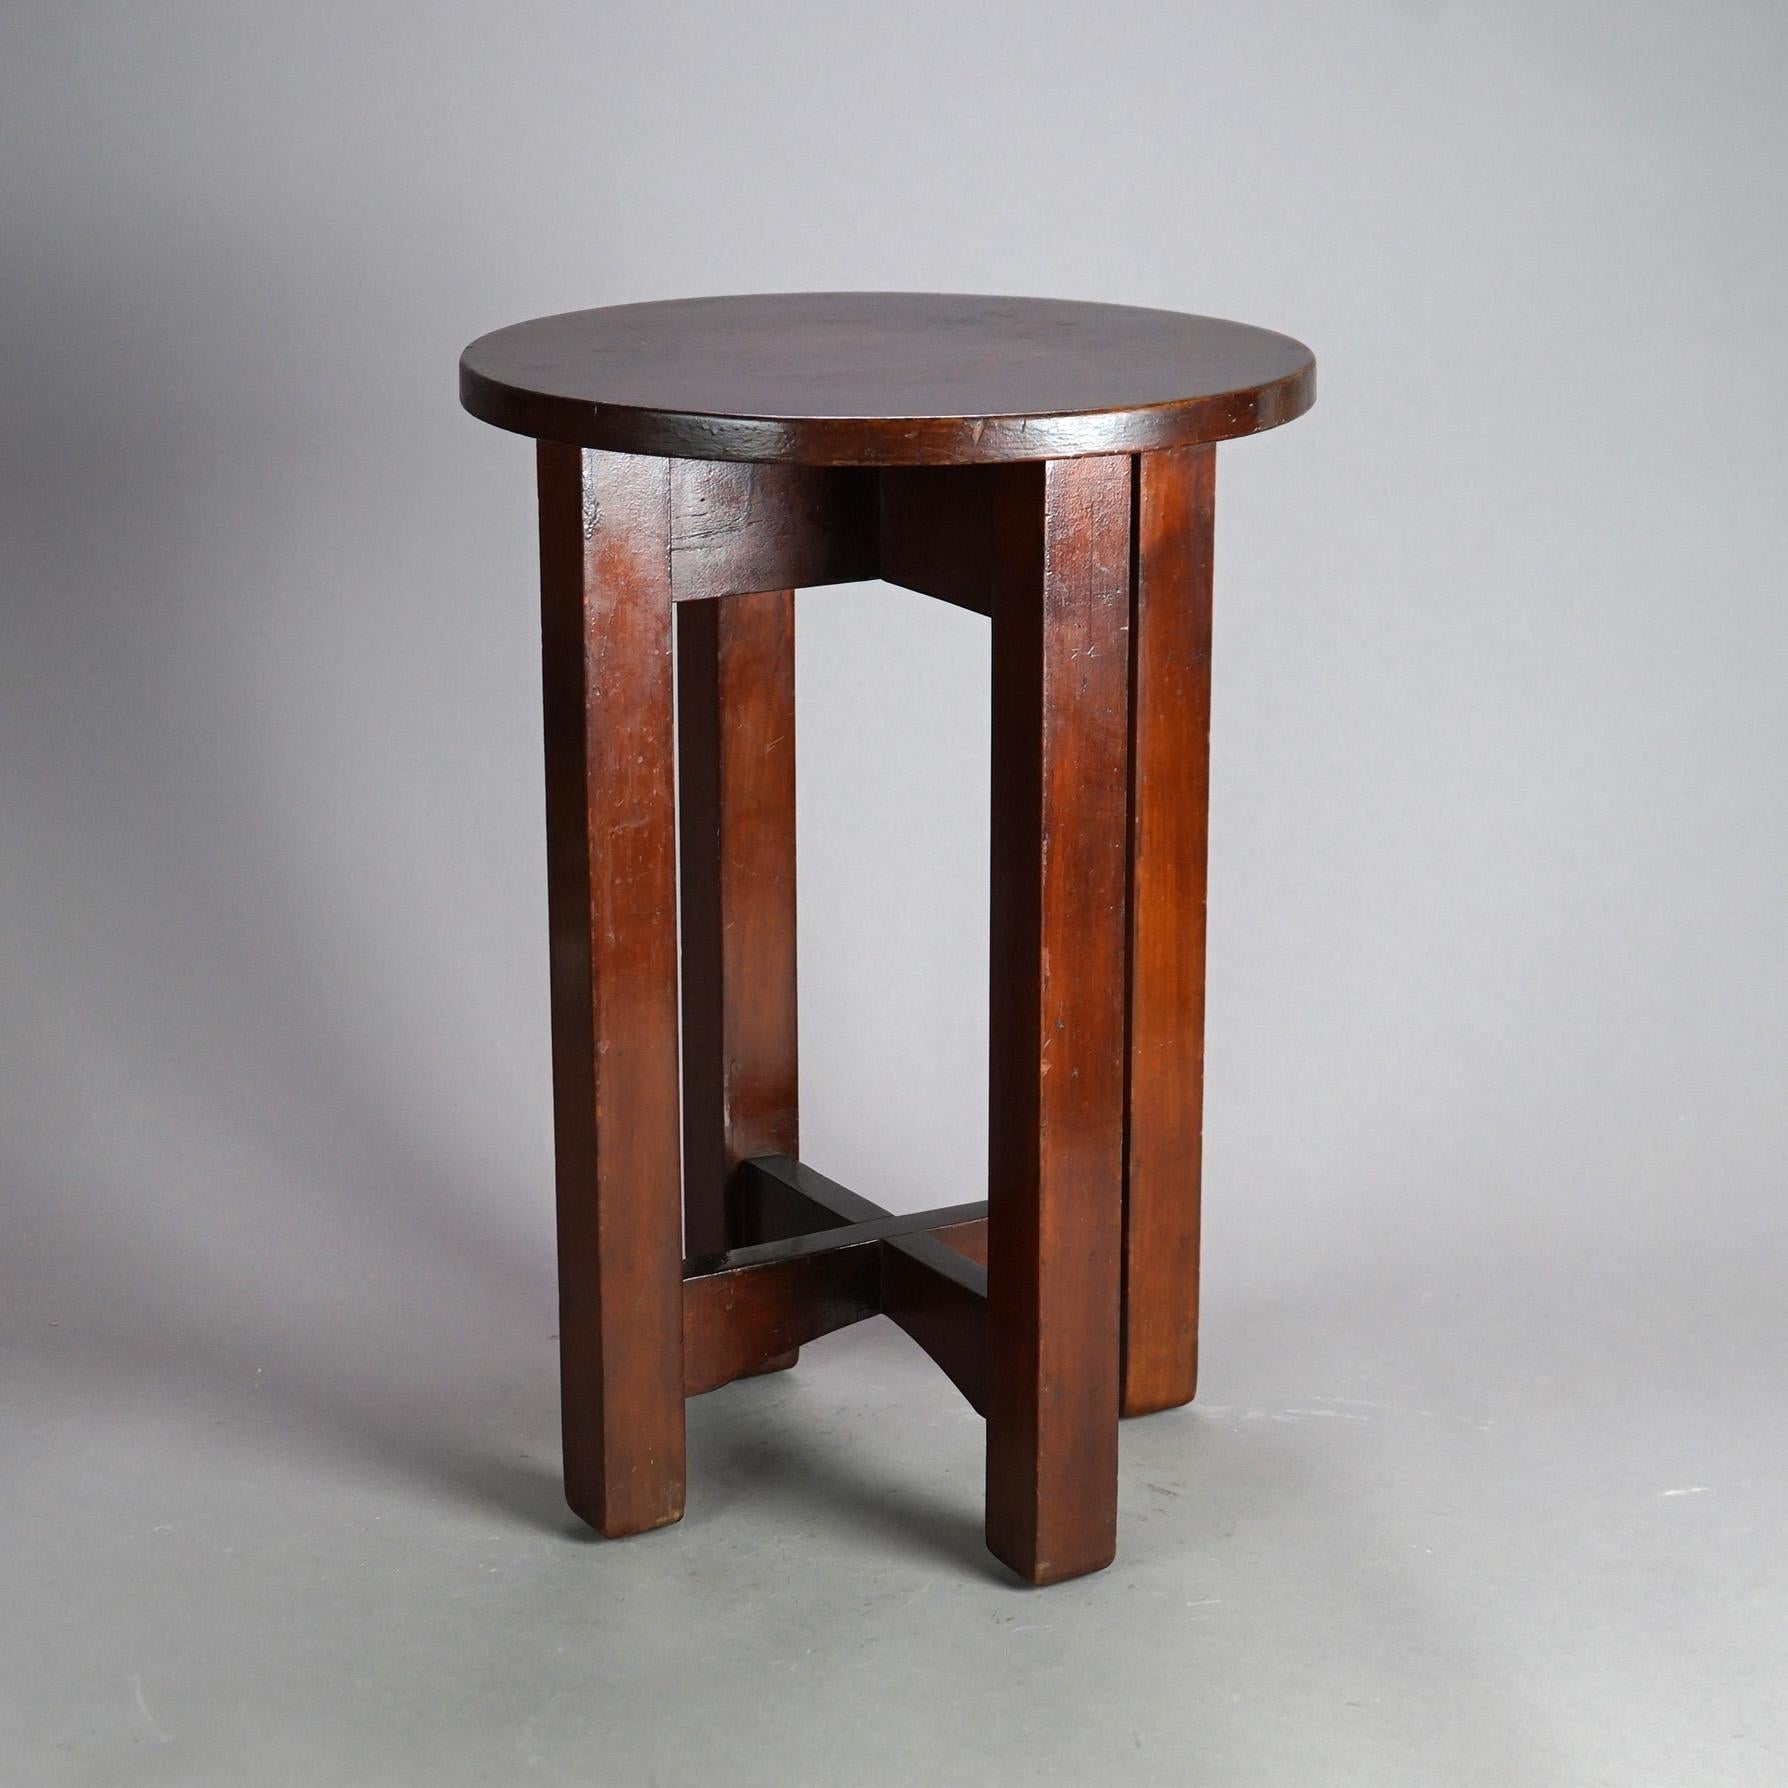 An antique Arts and Crafts Mission tabouret stand in the manner of Stickley offers oak construction with round top raised on straight square legs having x-stretcher, c1910

Measures - 20